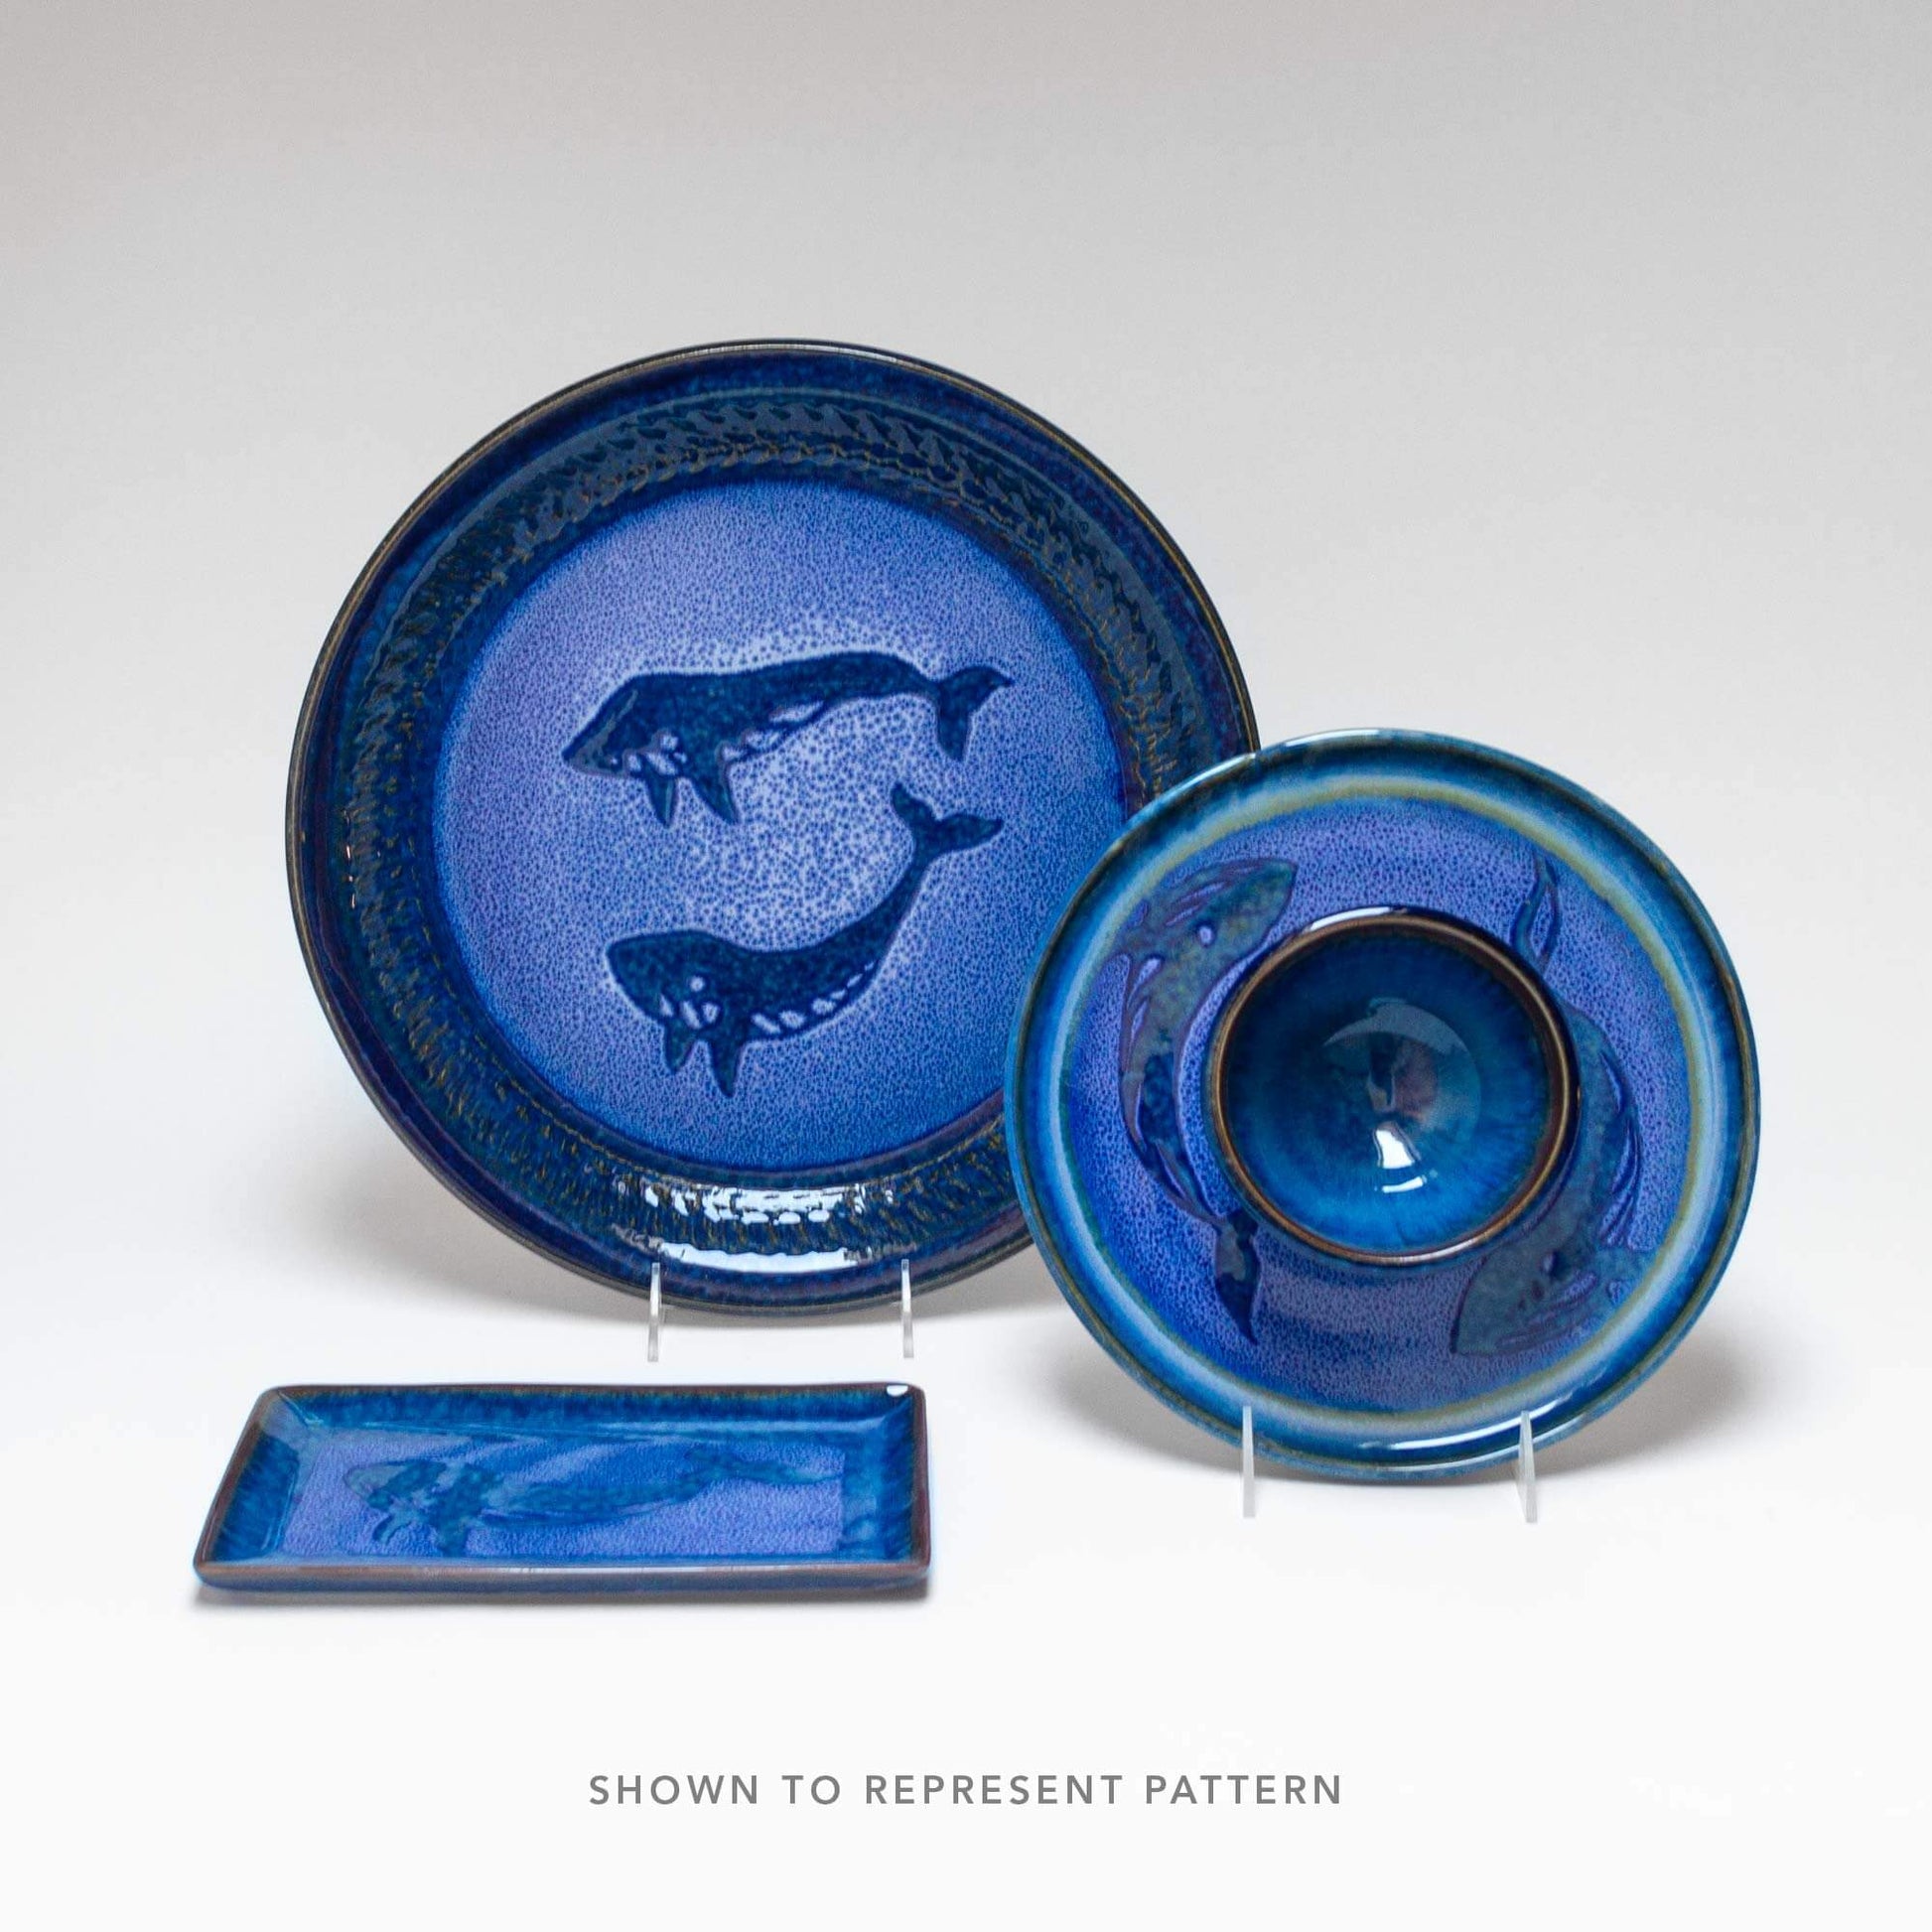 Handmade Pottery Small Clock w/ Stand in Blue Whale pattern made by Georgetown Pottery in Maine